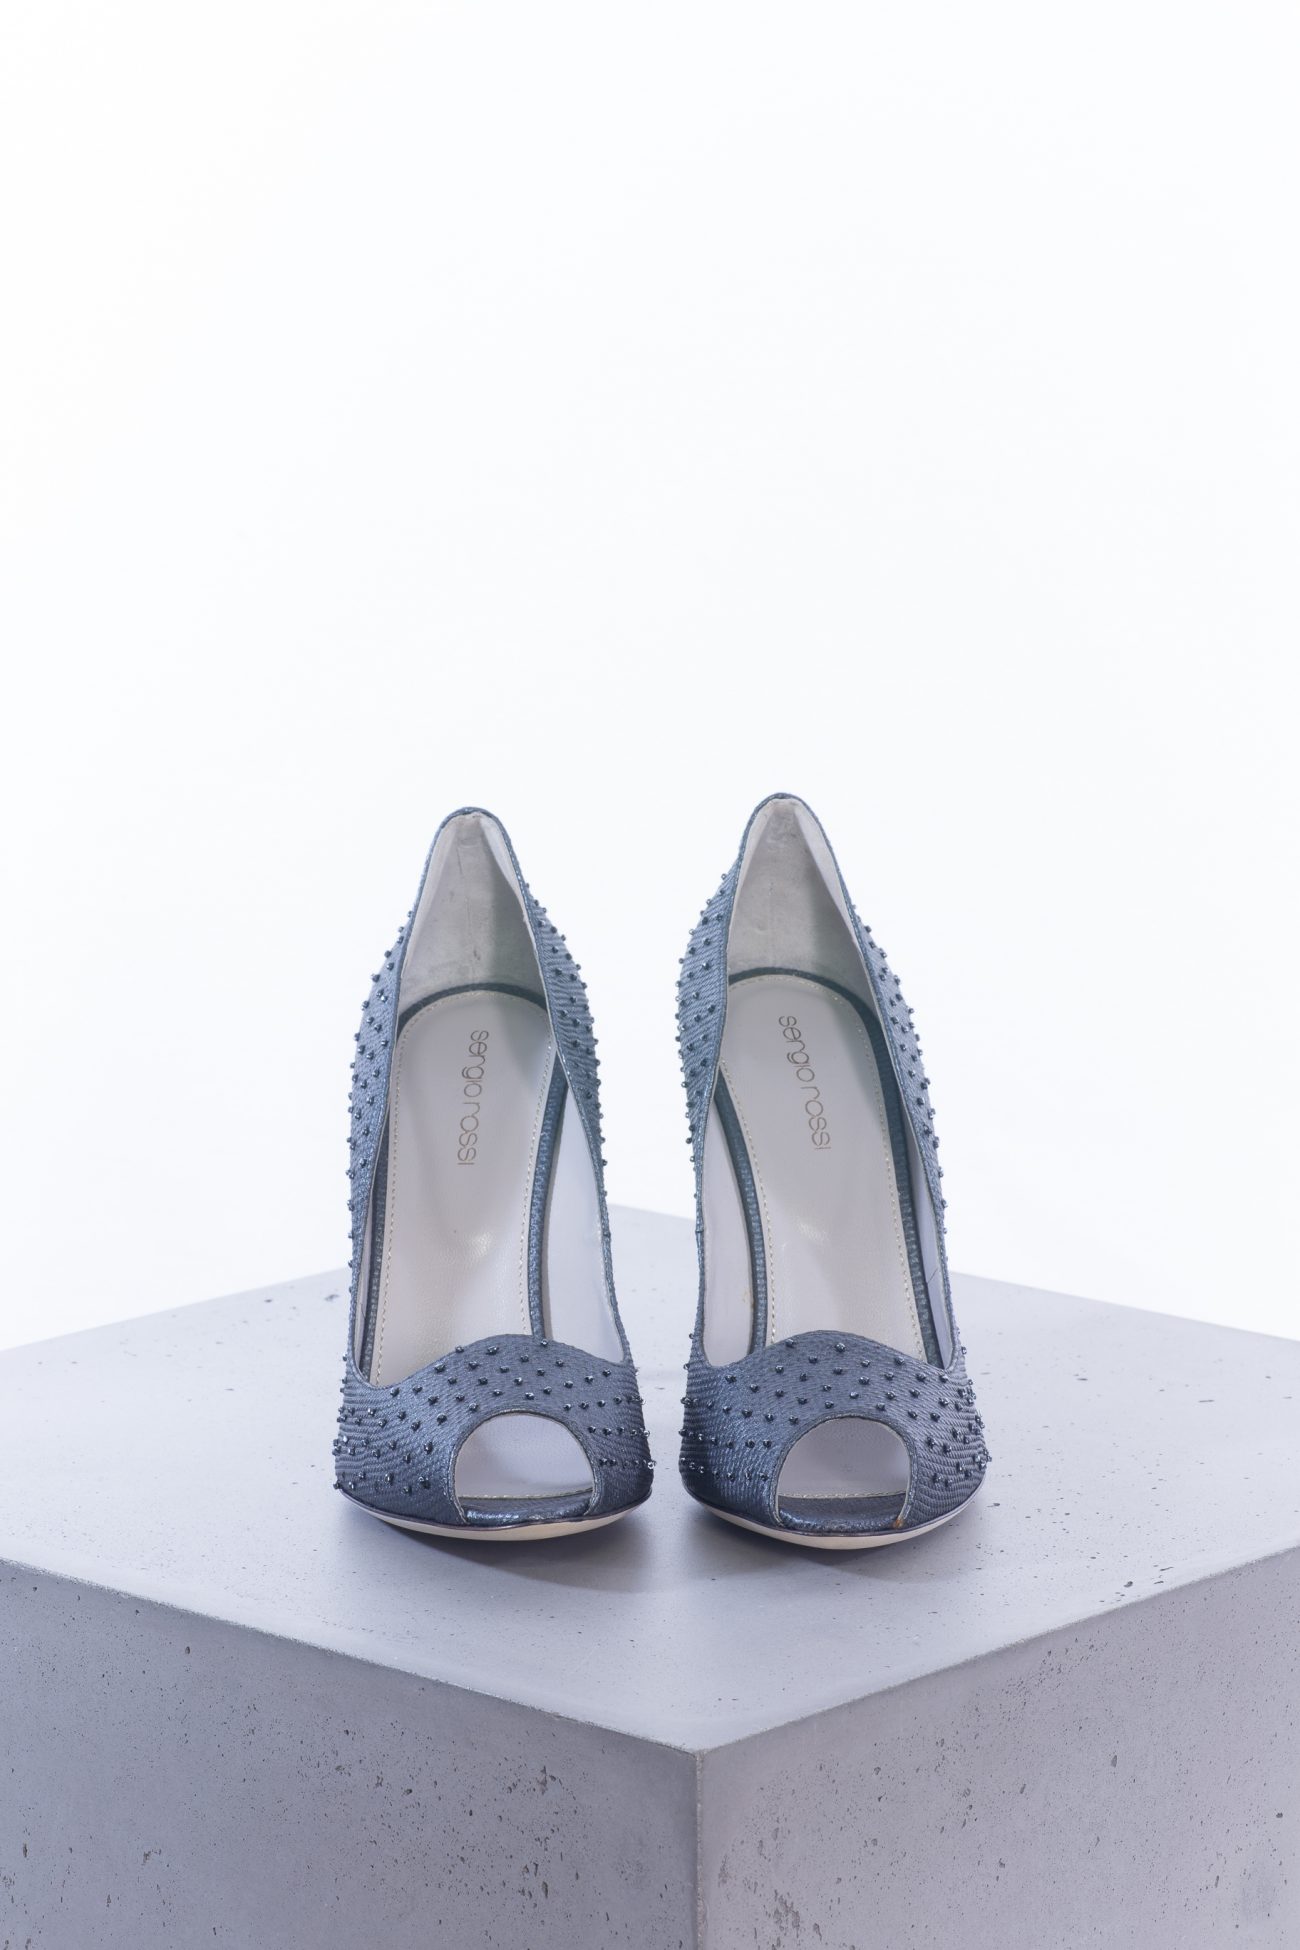 Sergio Rossi Embellished Pumps with glass pearls